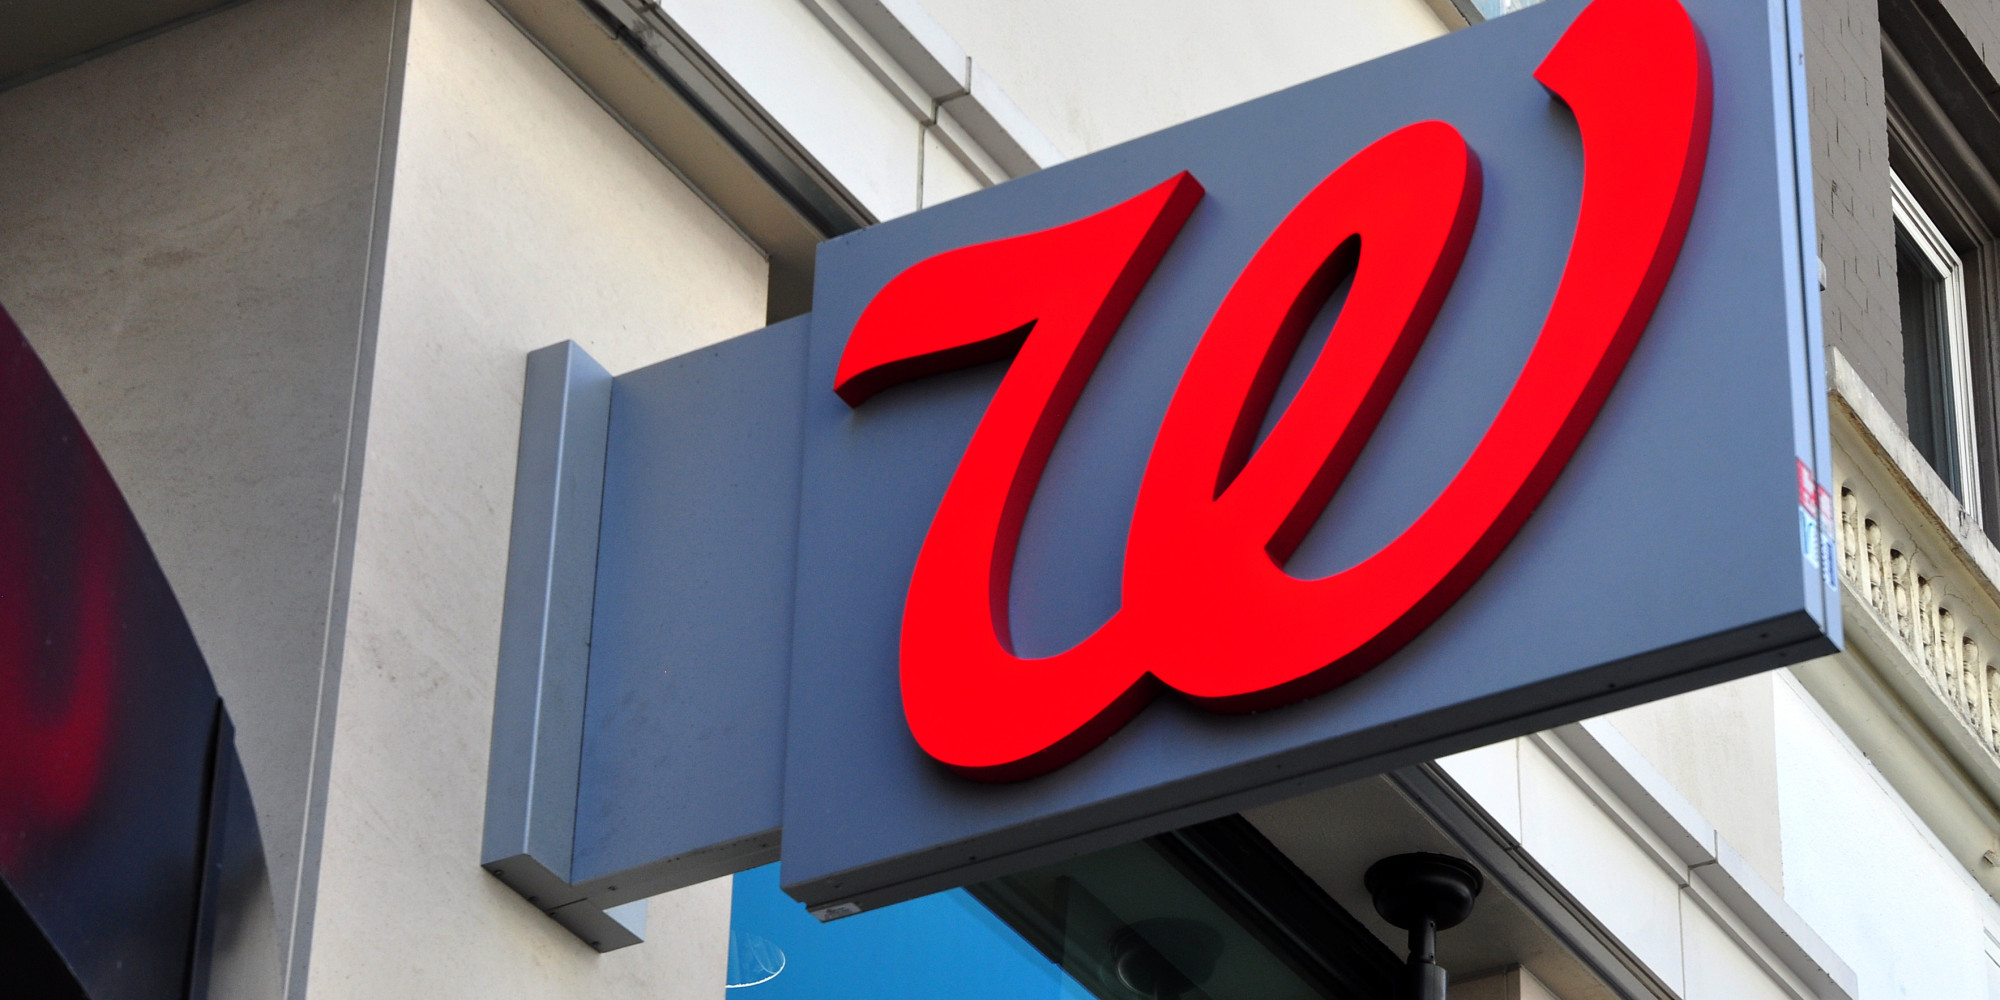 13 Of The Best Walgreens Beauty Buys For Under $20 | HuffPost